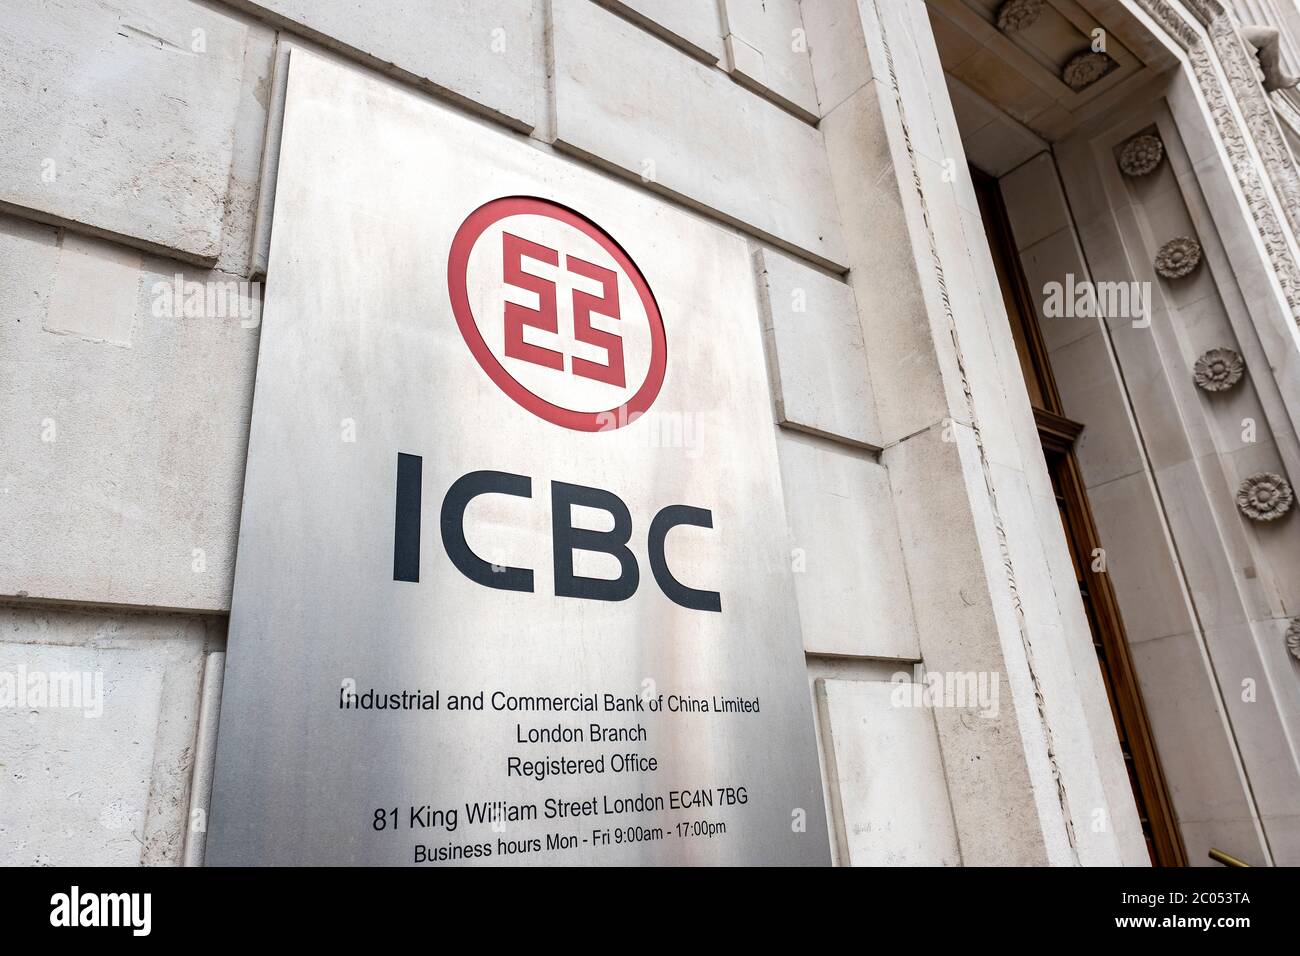 LONDON- JUNE, 2020: Industrial and Commercial Bank of China, or ICBC. Exterior and signage, an international commercial and investment bank located in Stock Photo